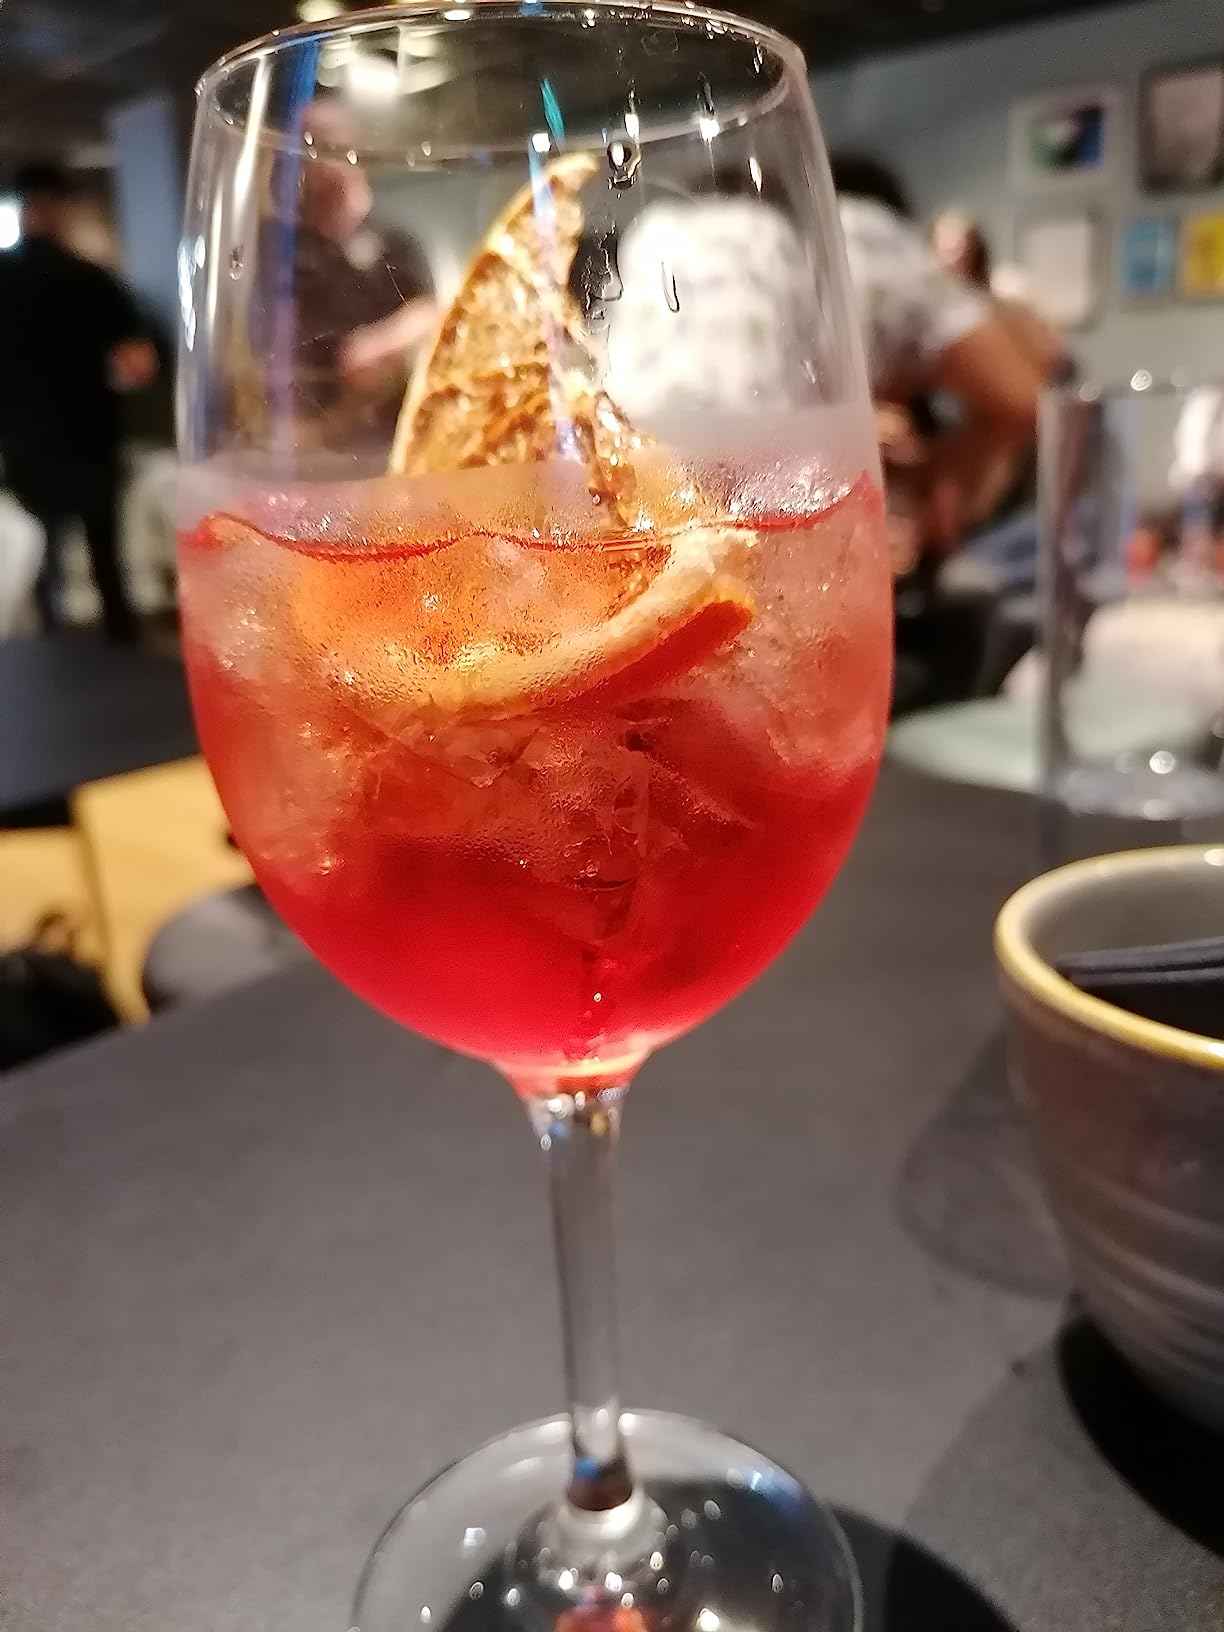 Made a lovely cocktail